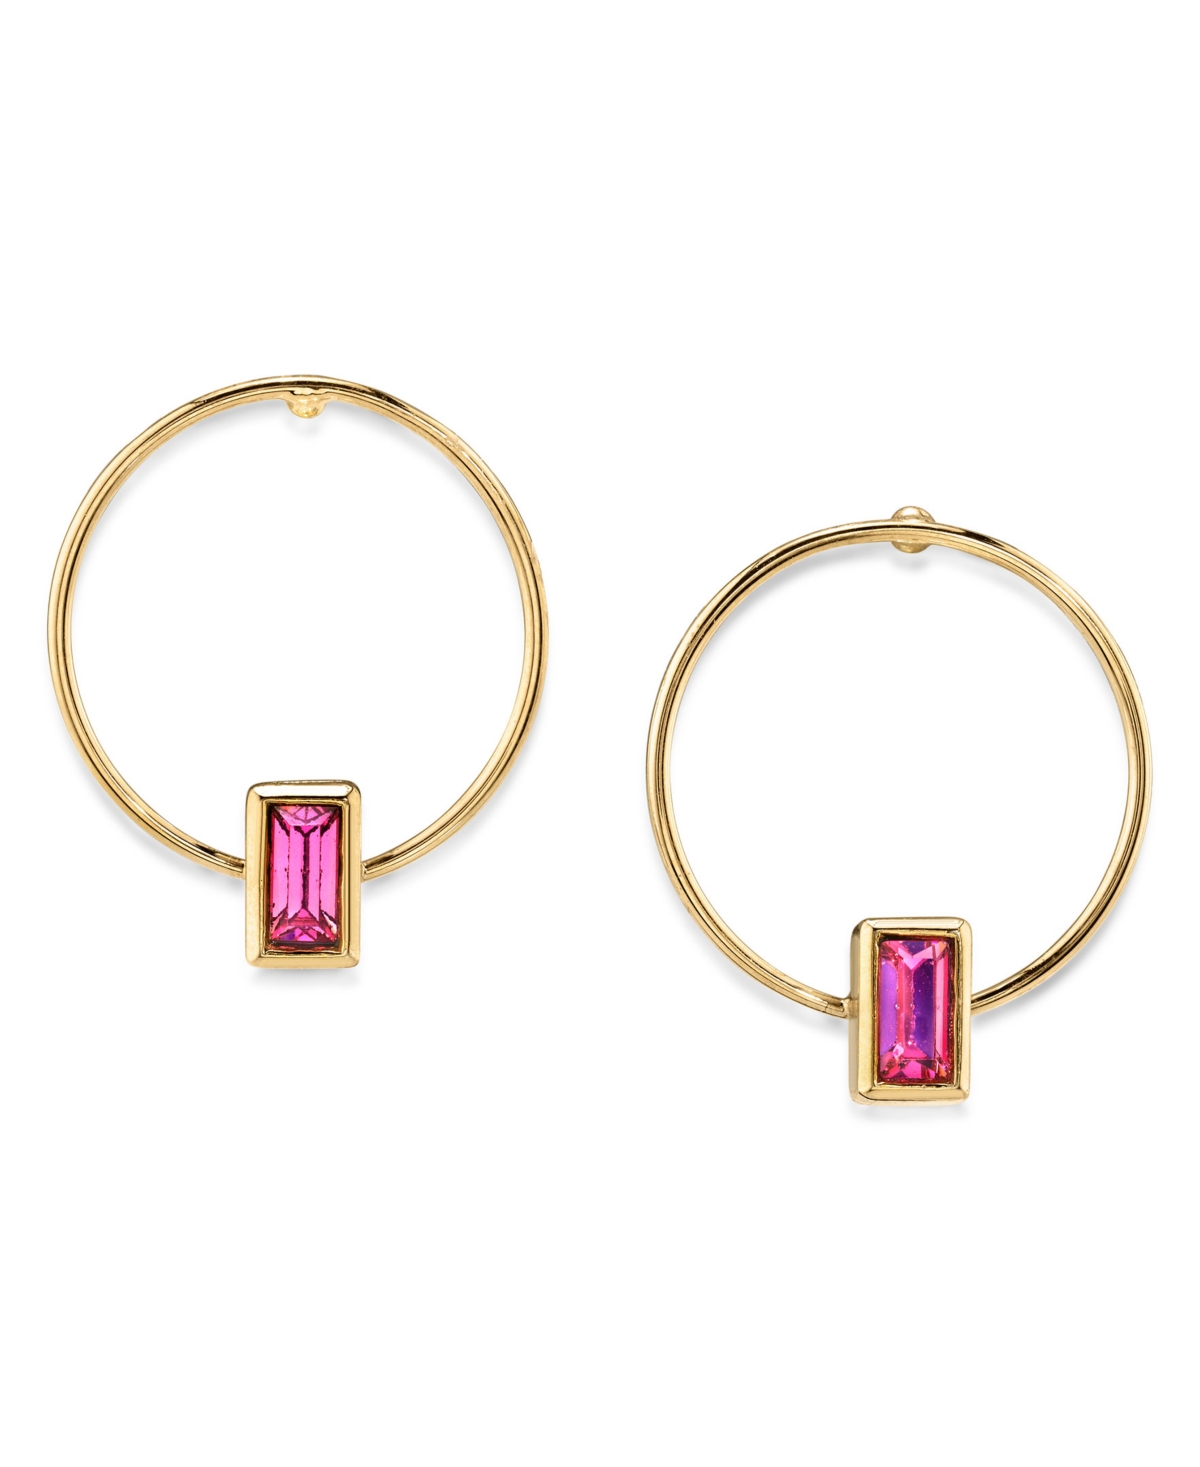 2028 14k Gold Dipped Rectangle Crystal Hoop Stainless Steel Post Small Earrings In Pink